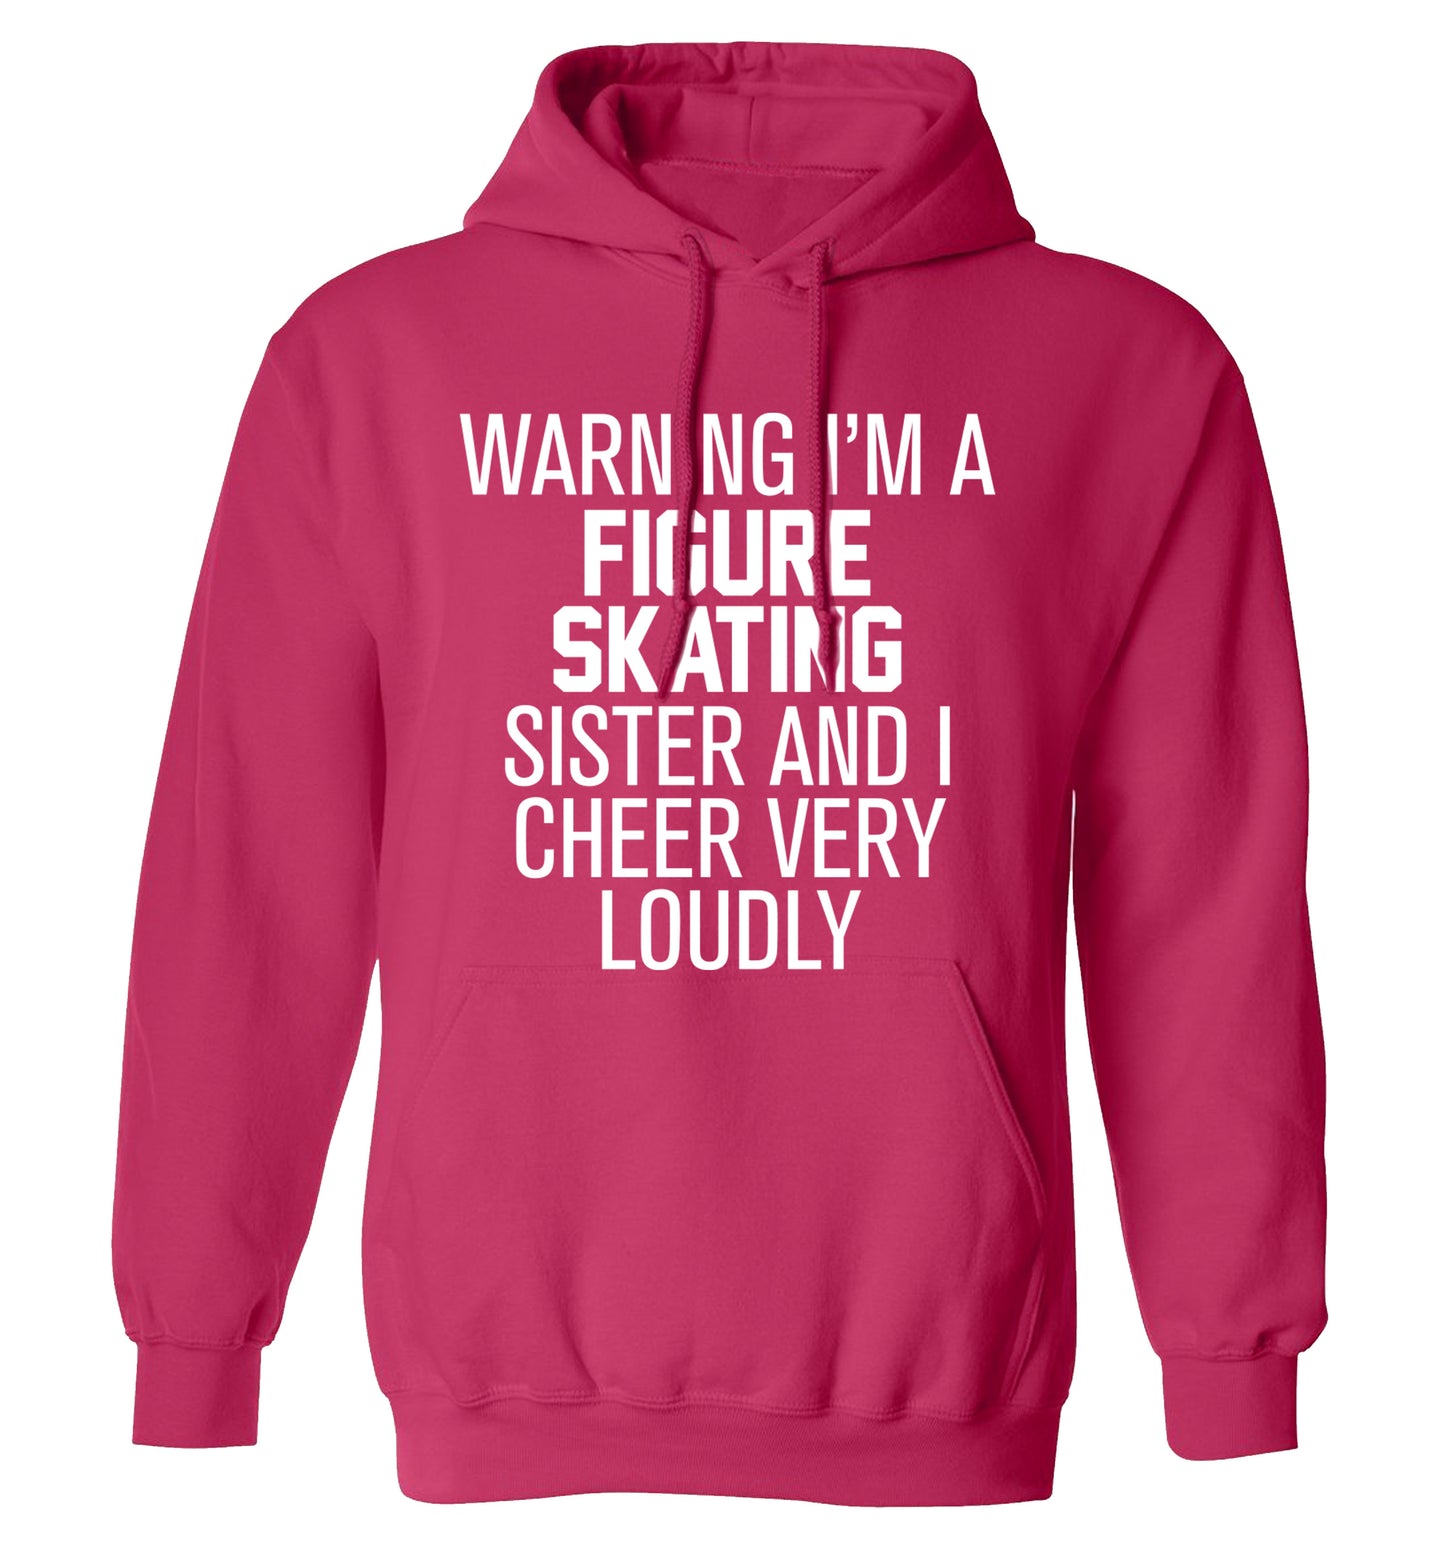 Warning I'm a figure skating sister and I cheer very loudly adults unisexpink hoodie 2XL